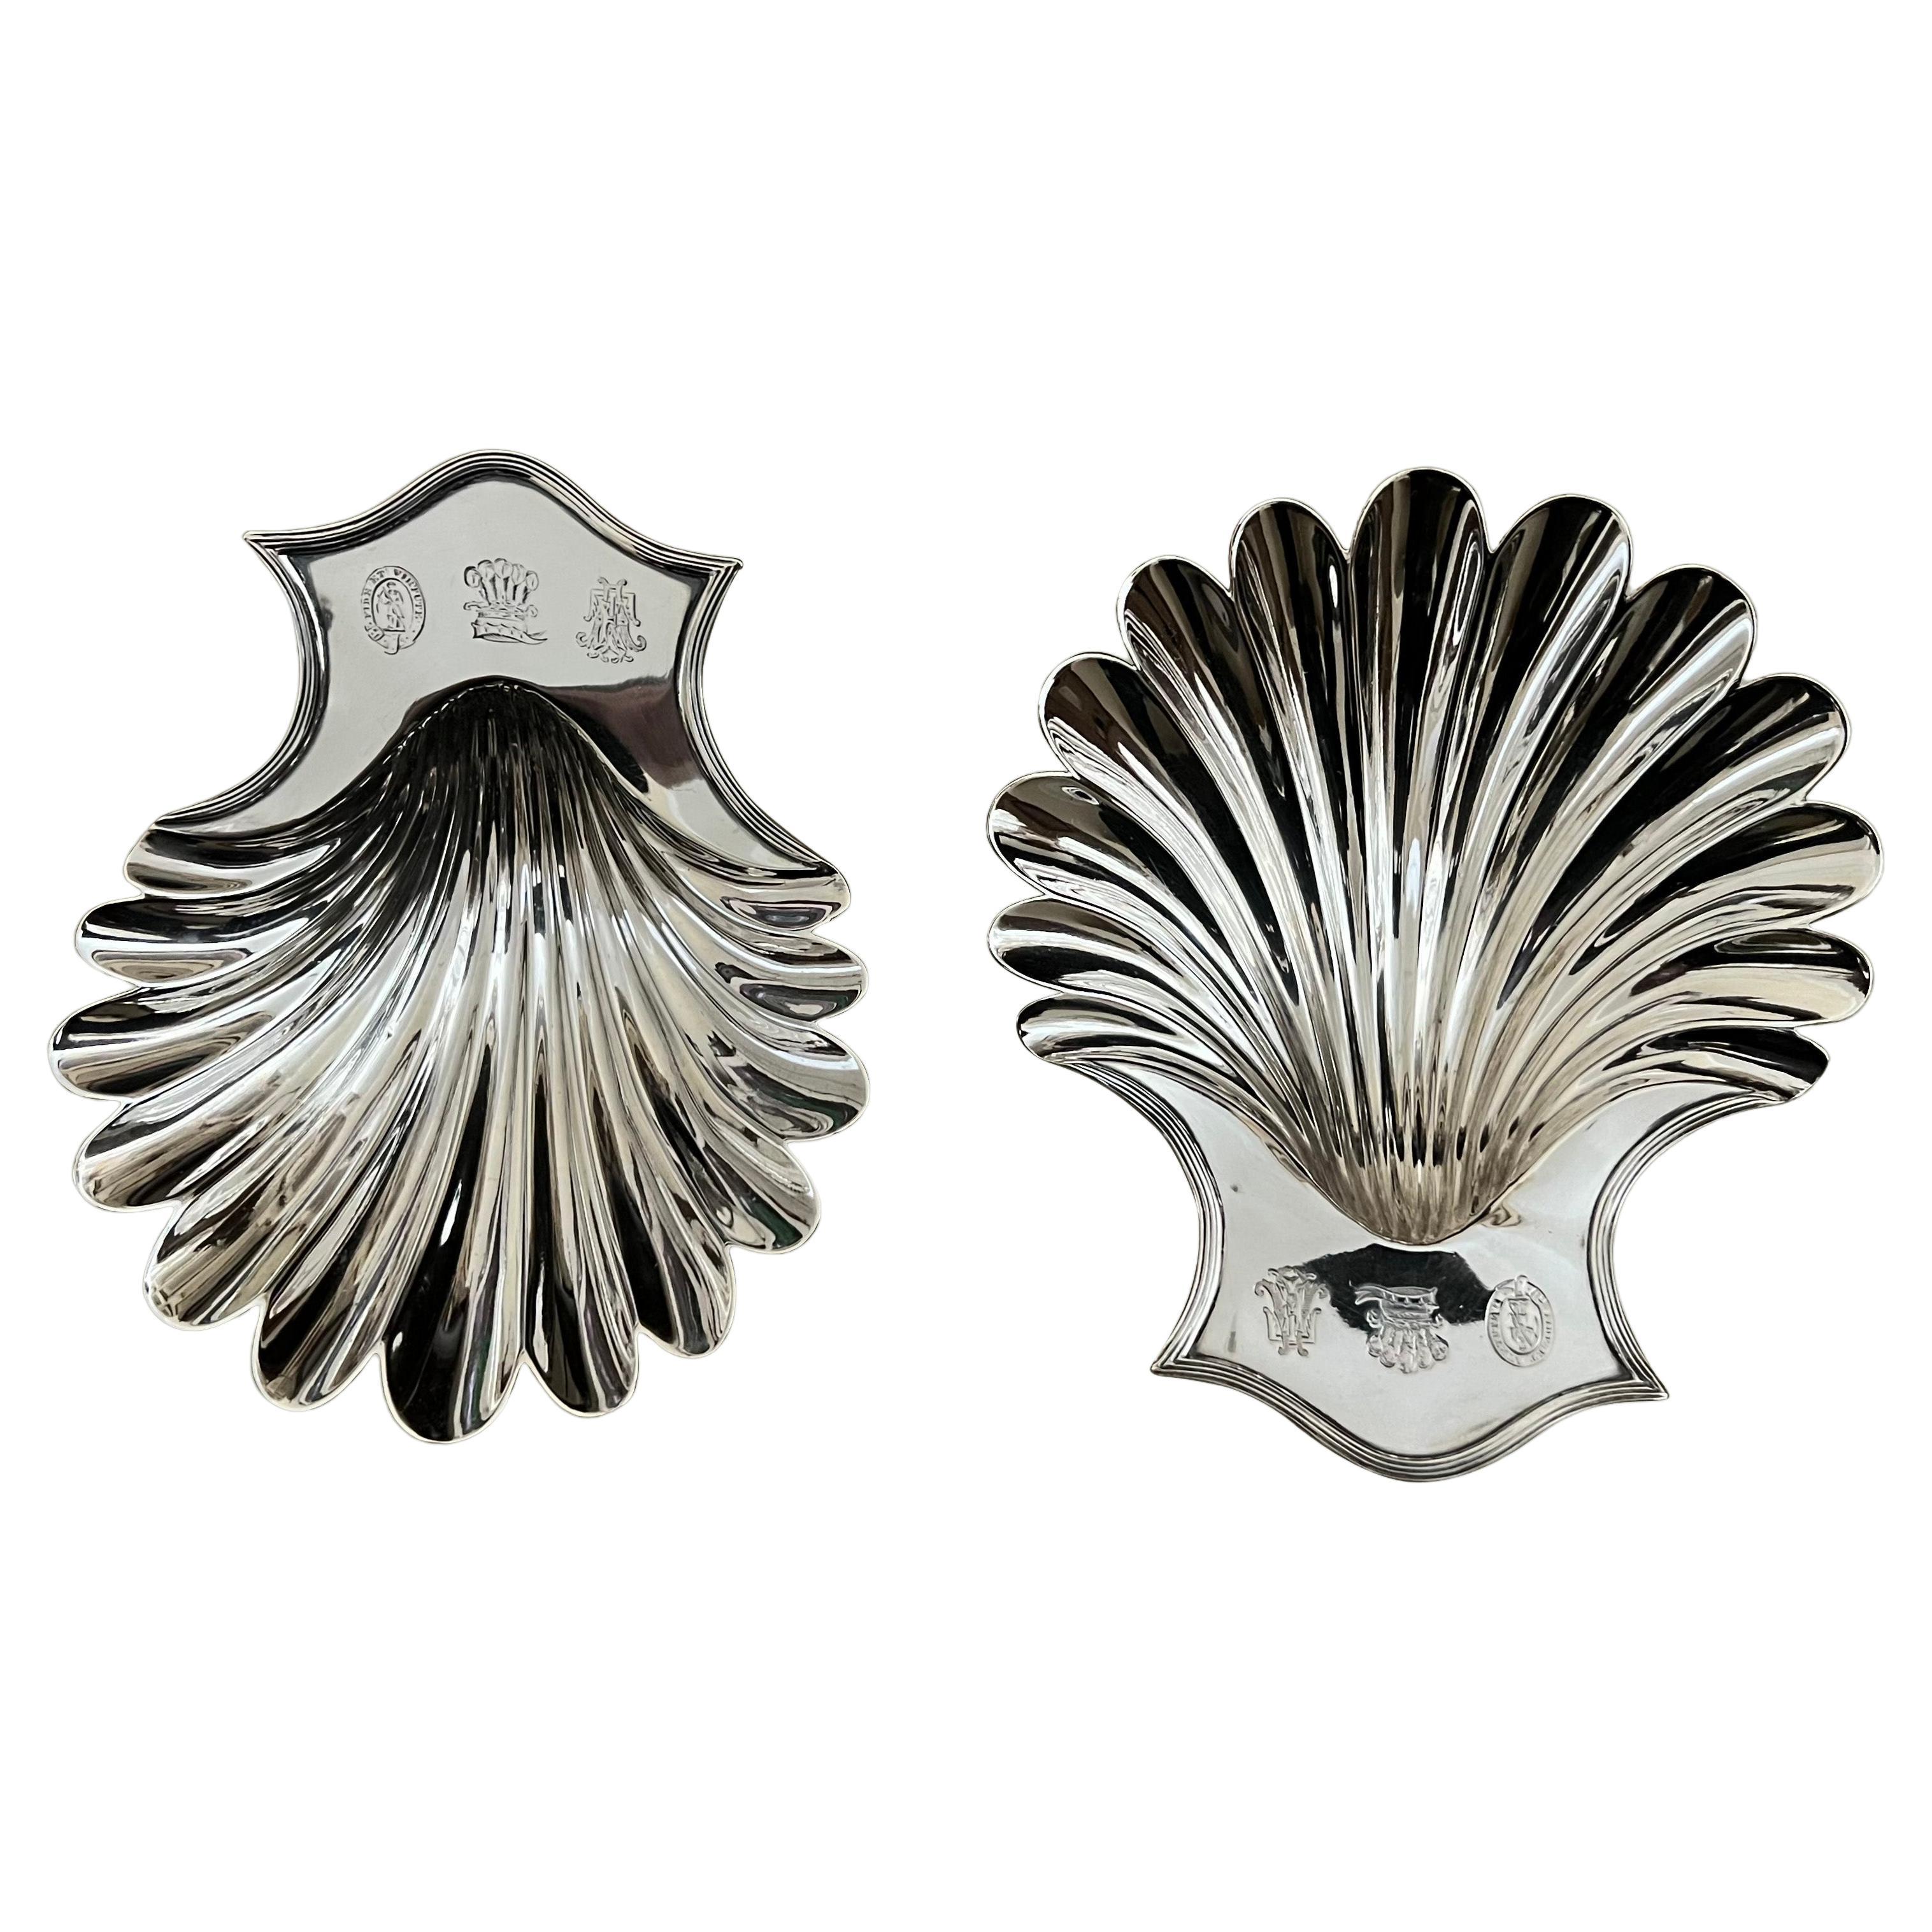 Pair of George III Sterling Silver Butter Shells by Bateman Family, London 1802